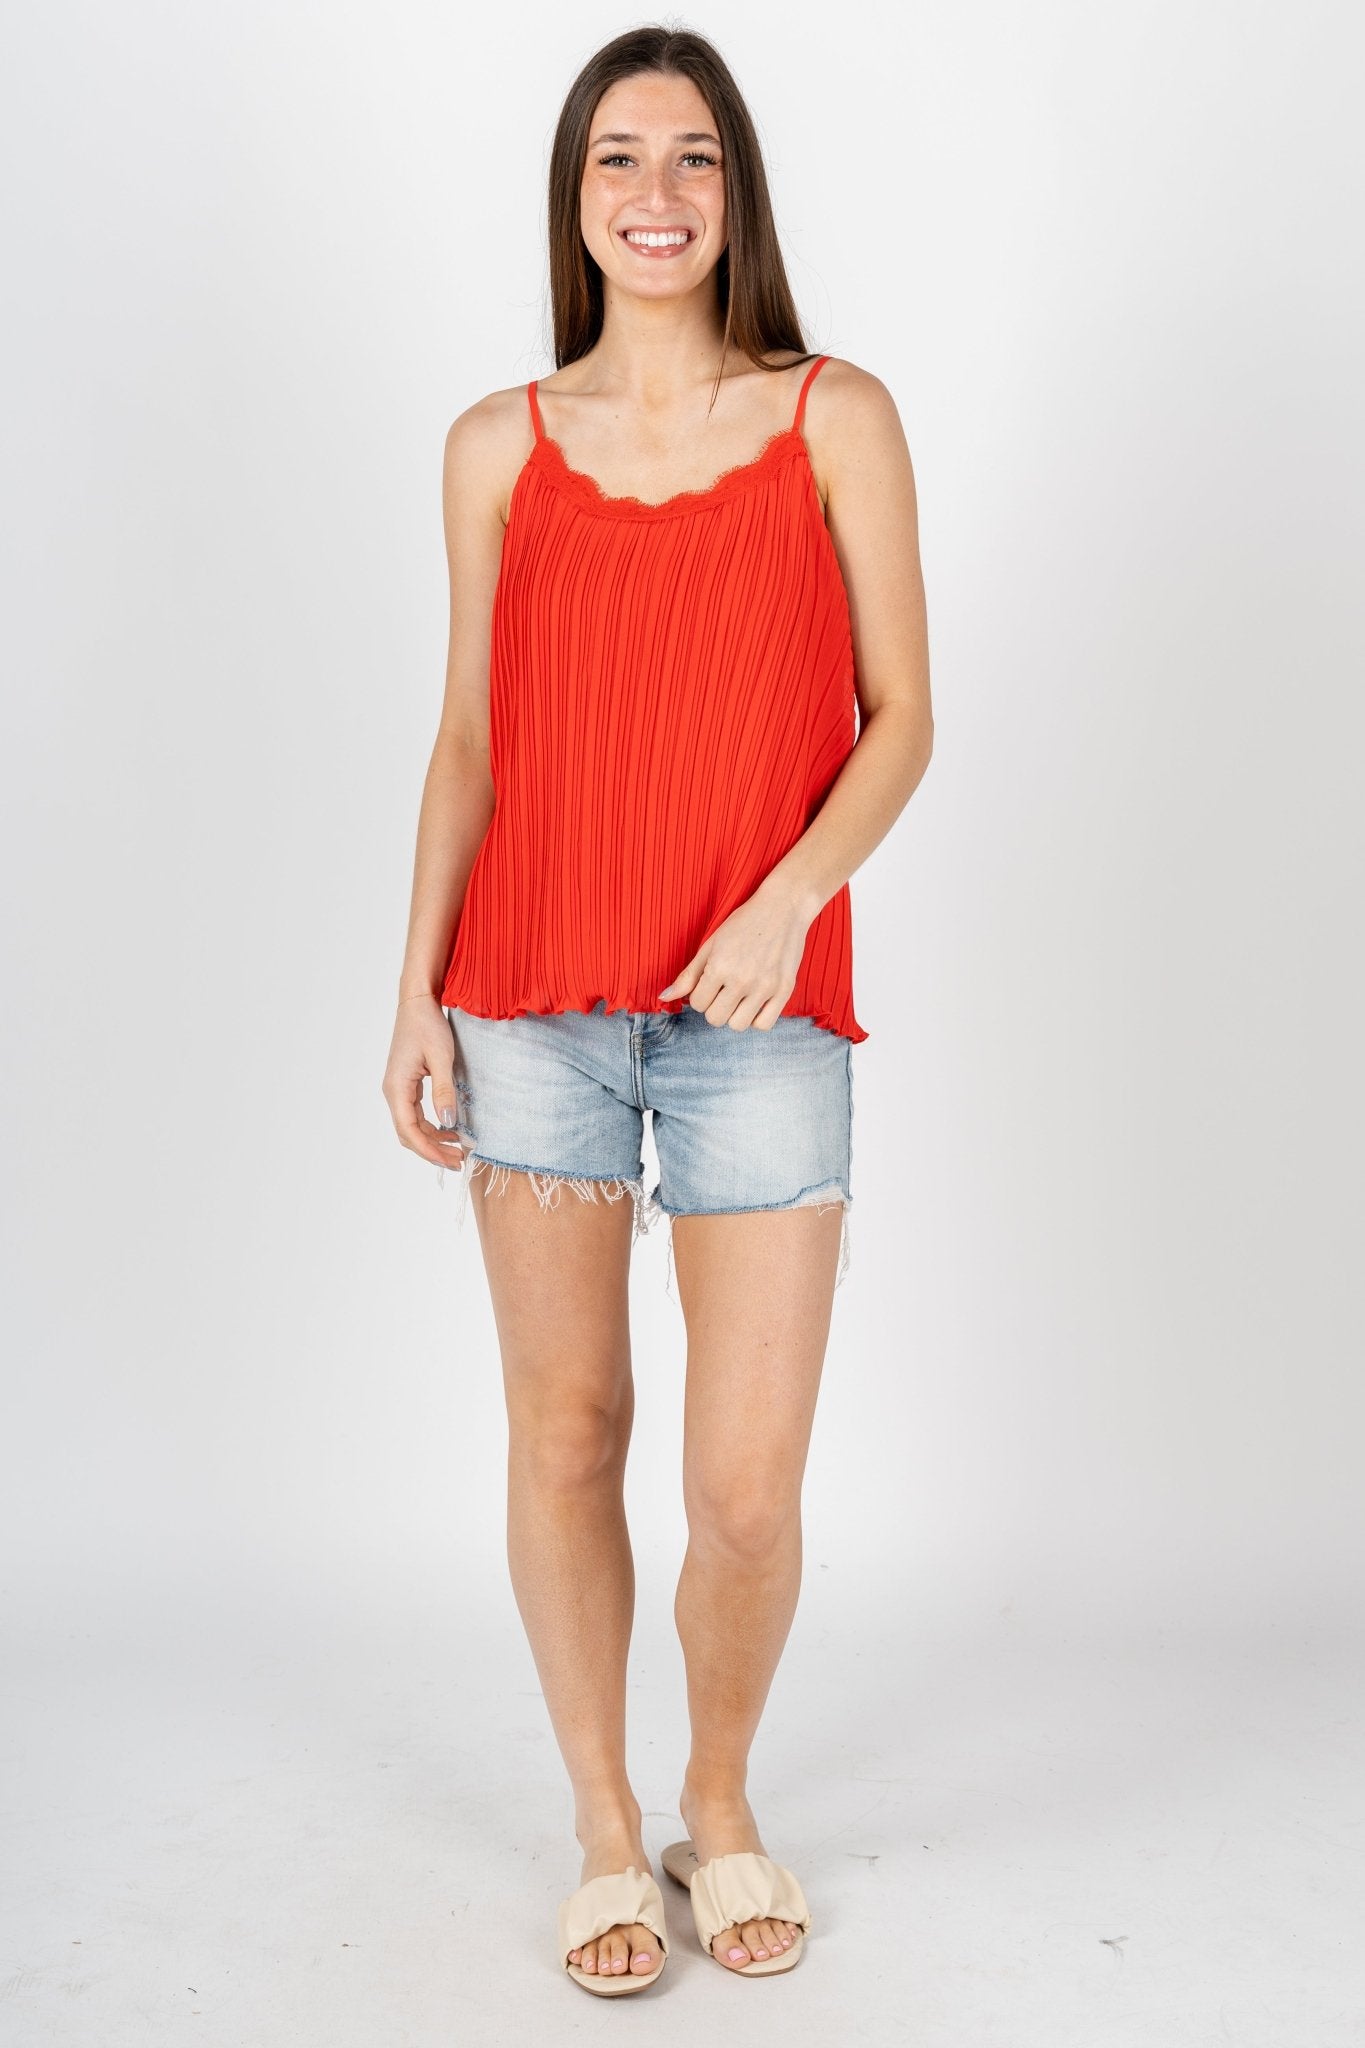 Pleated lace cami tank top coral red - Stylish sweater - Trendy American Summer Fashion at Lush Fashion Lounge Boutique in Oklahoma